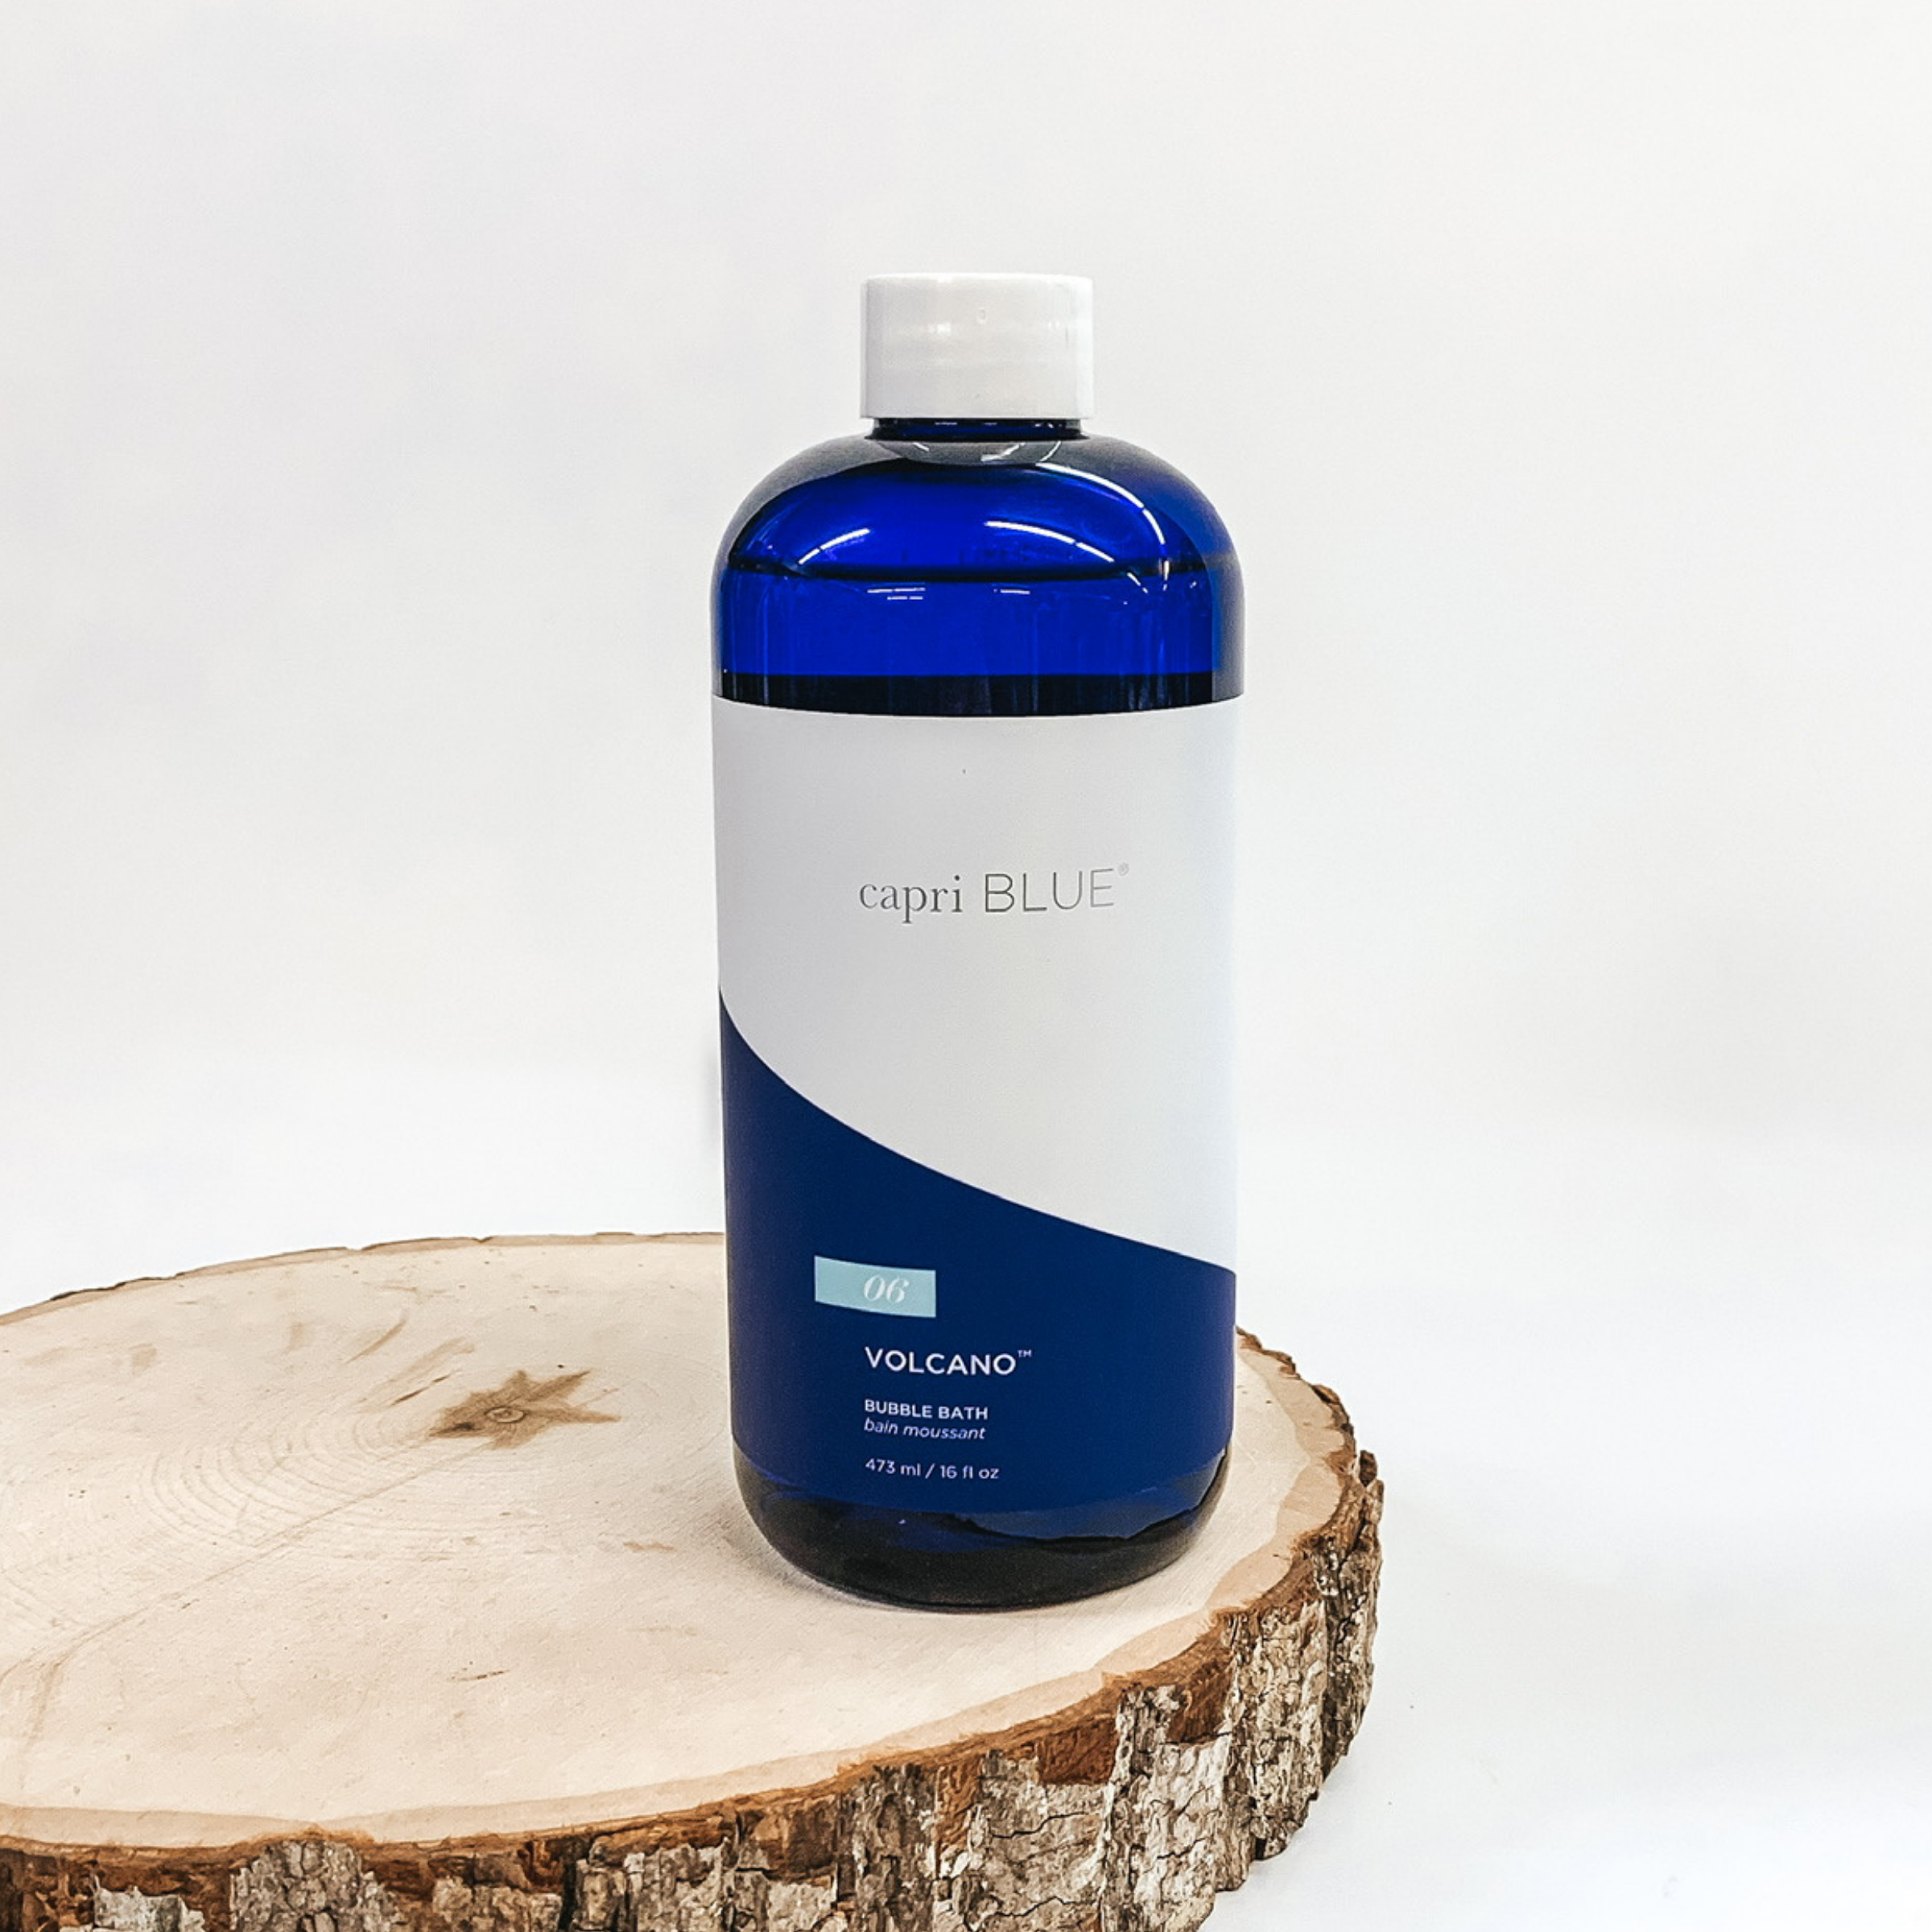 A blue bottle of bubble bath pictured on wooden display on white background.